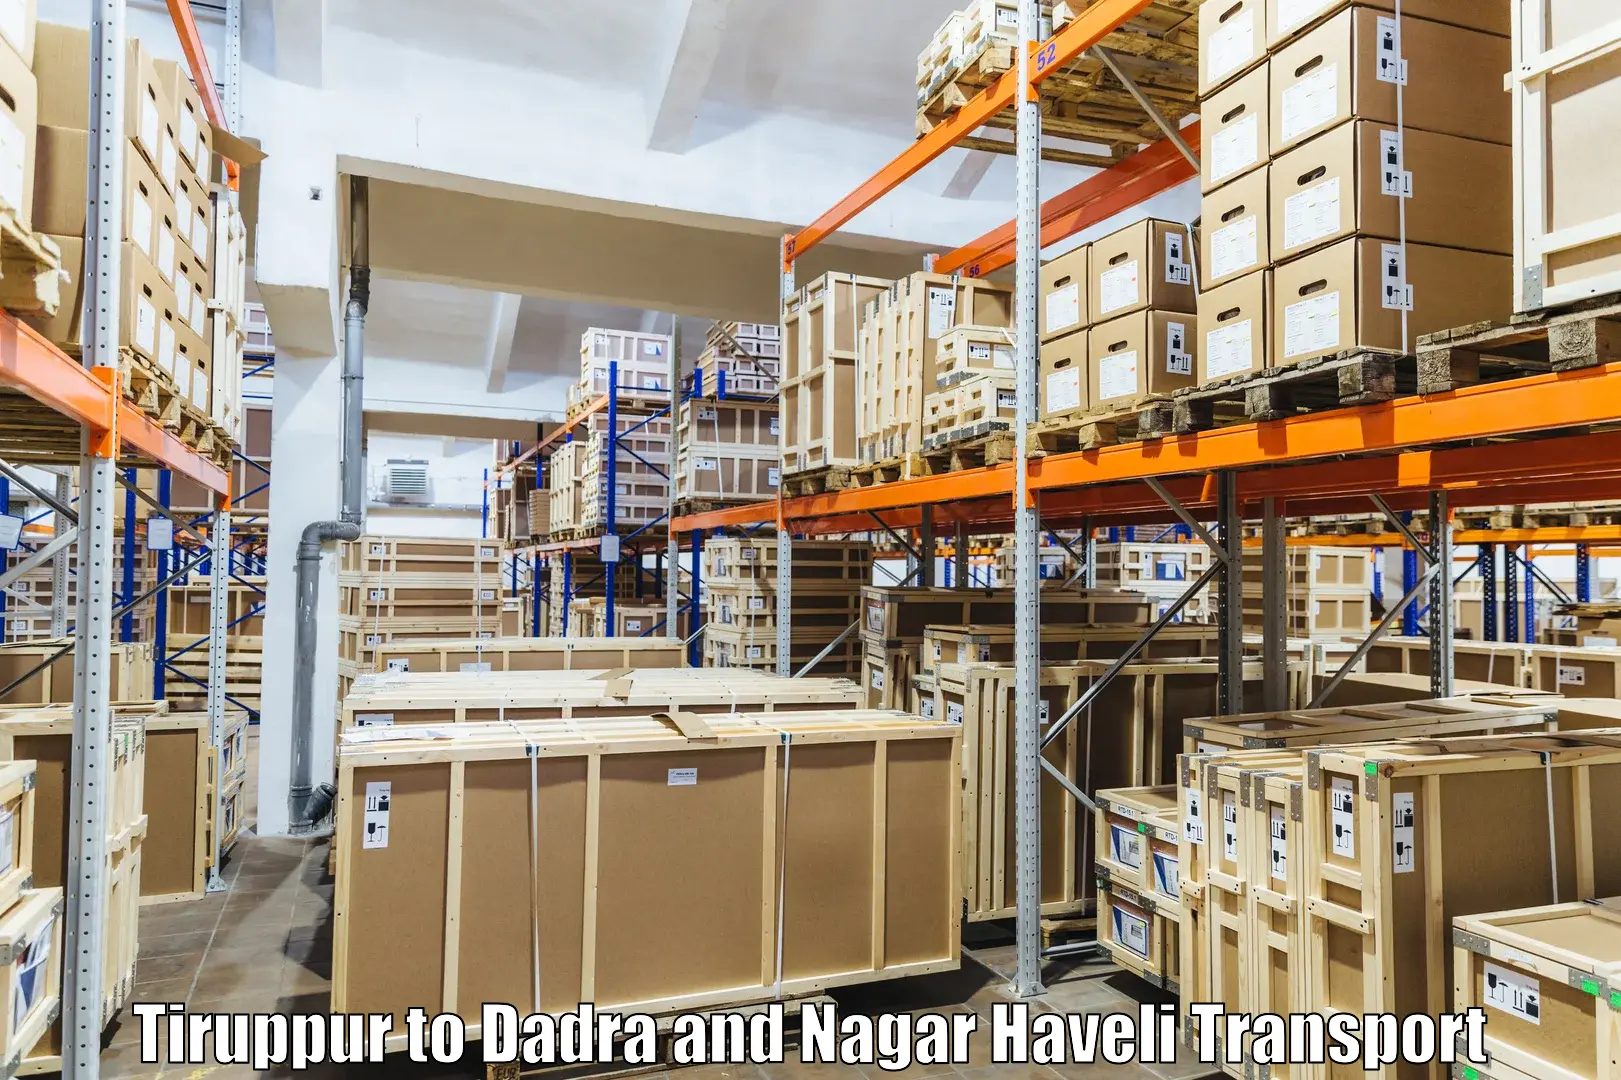 Truck transport companies in India Tiruppur to Dadra and Nagar Haveli